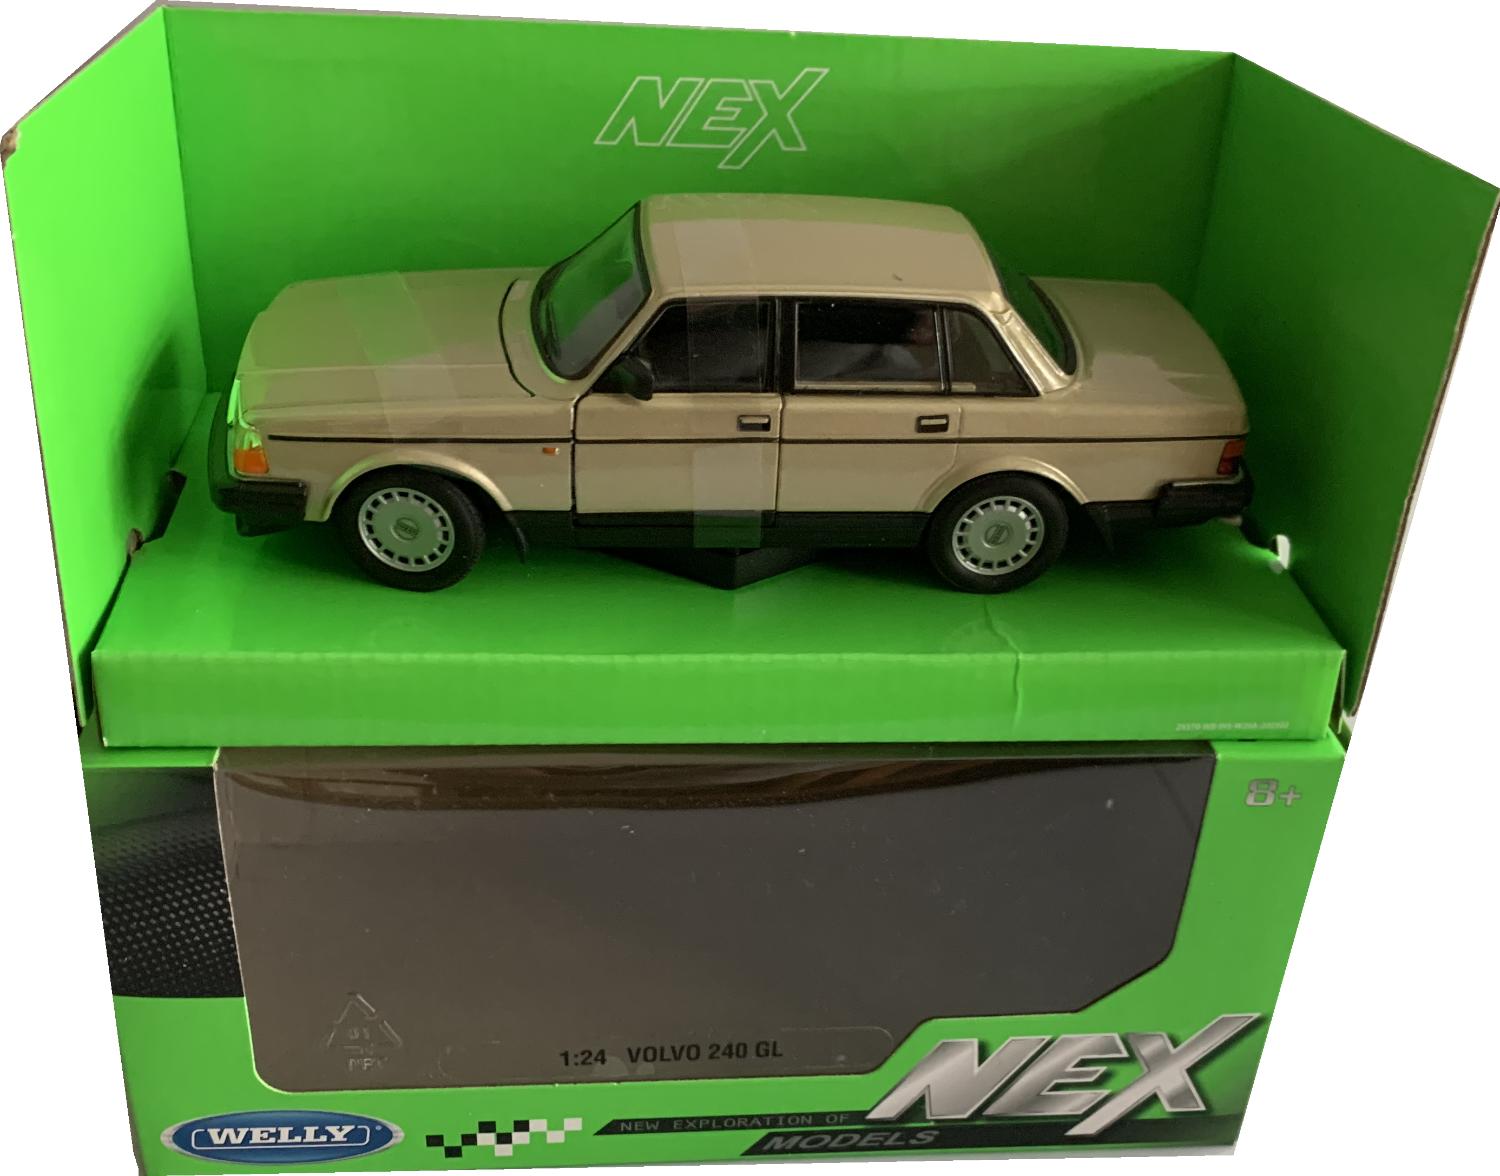 An excellent reproduction of the Volvo 240 GL with high level of detail throughout, all authentically recreated.  The model is presented in a window display box, the car is approx. 19 cm long and the presentation box is 23 cm long